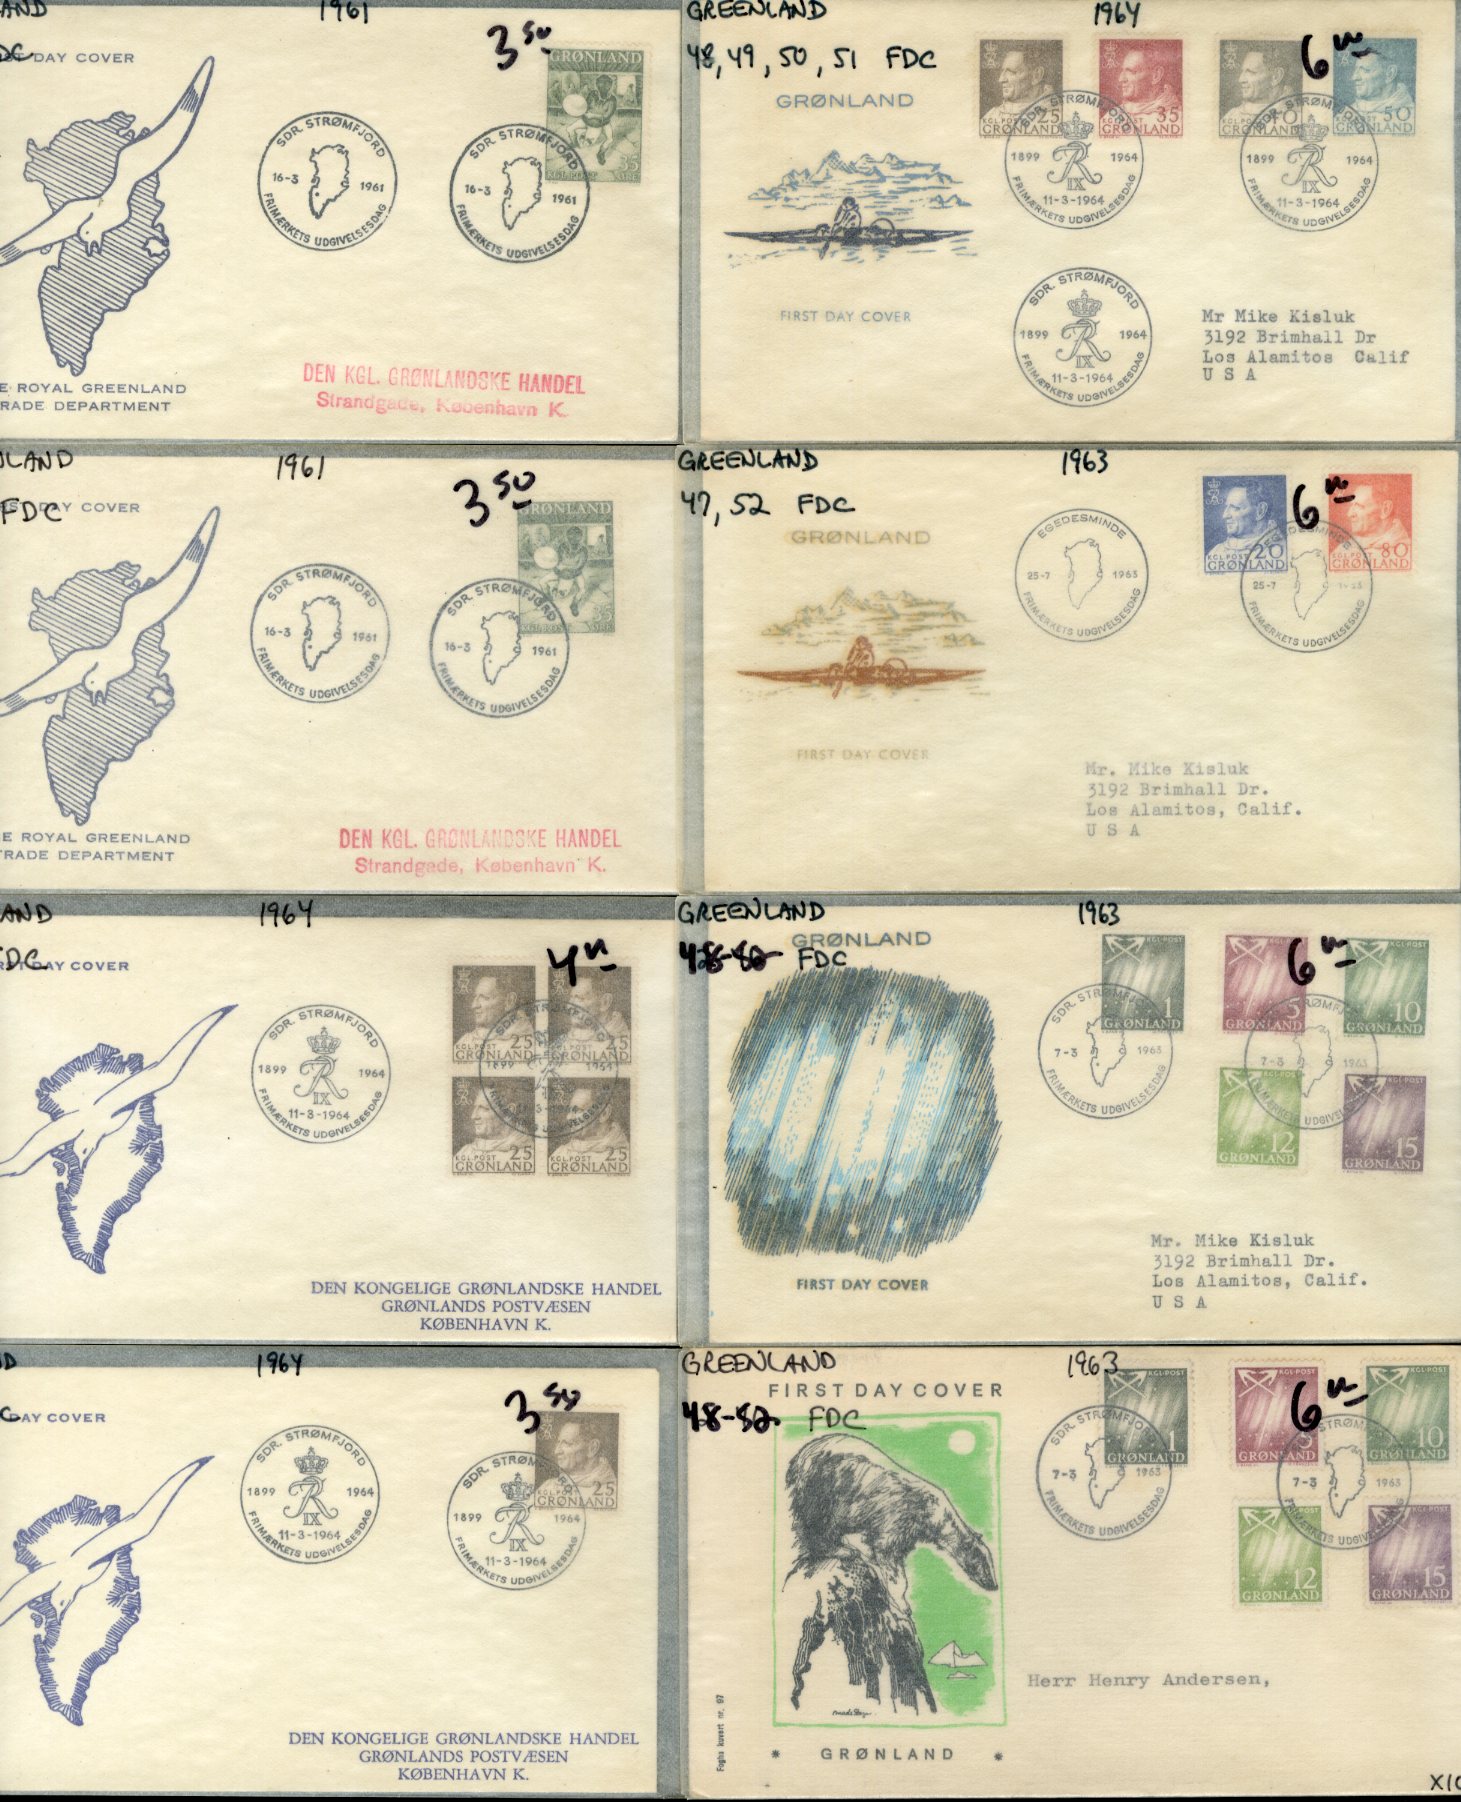 Lot 1556 - LARGE LOTS AND COLLECTIONS CHINA - PRC  -  Cherrystone Auctions Rare Stamps & Postal History of the World